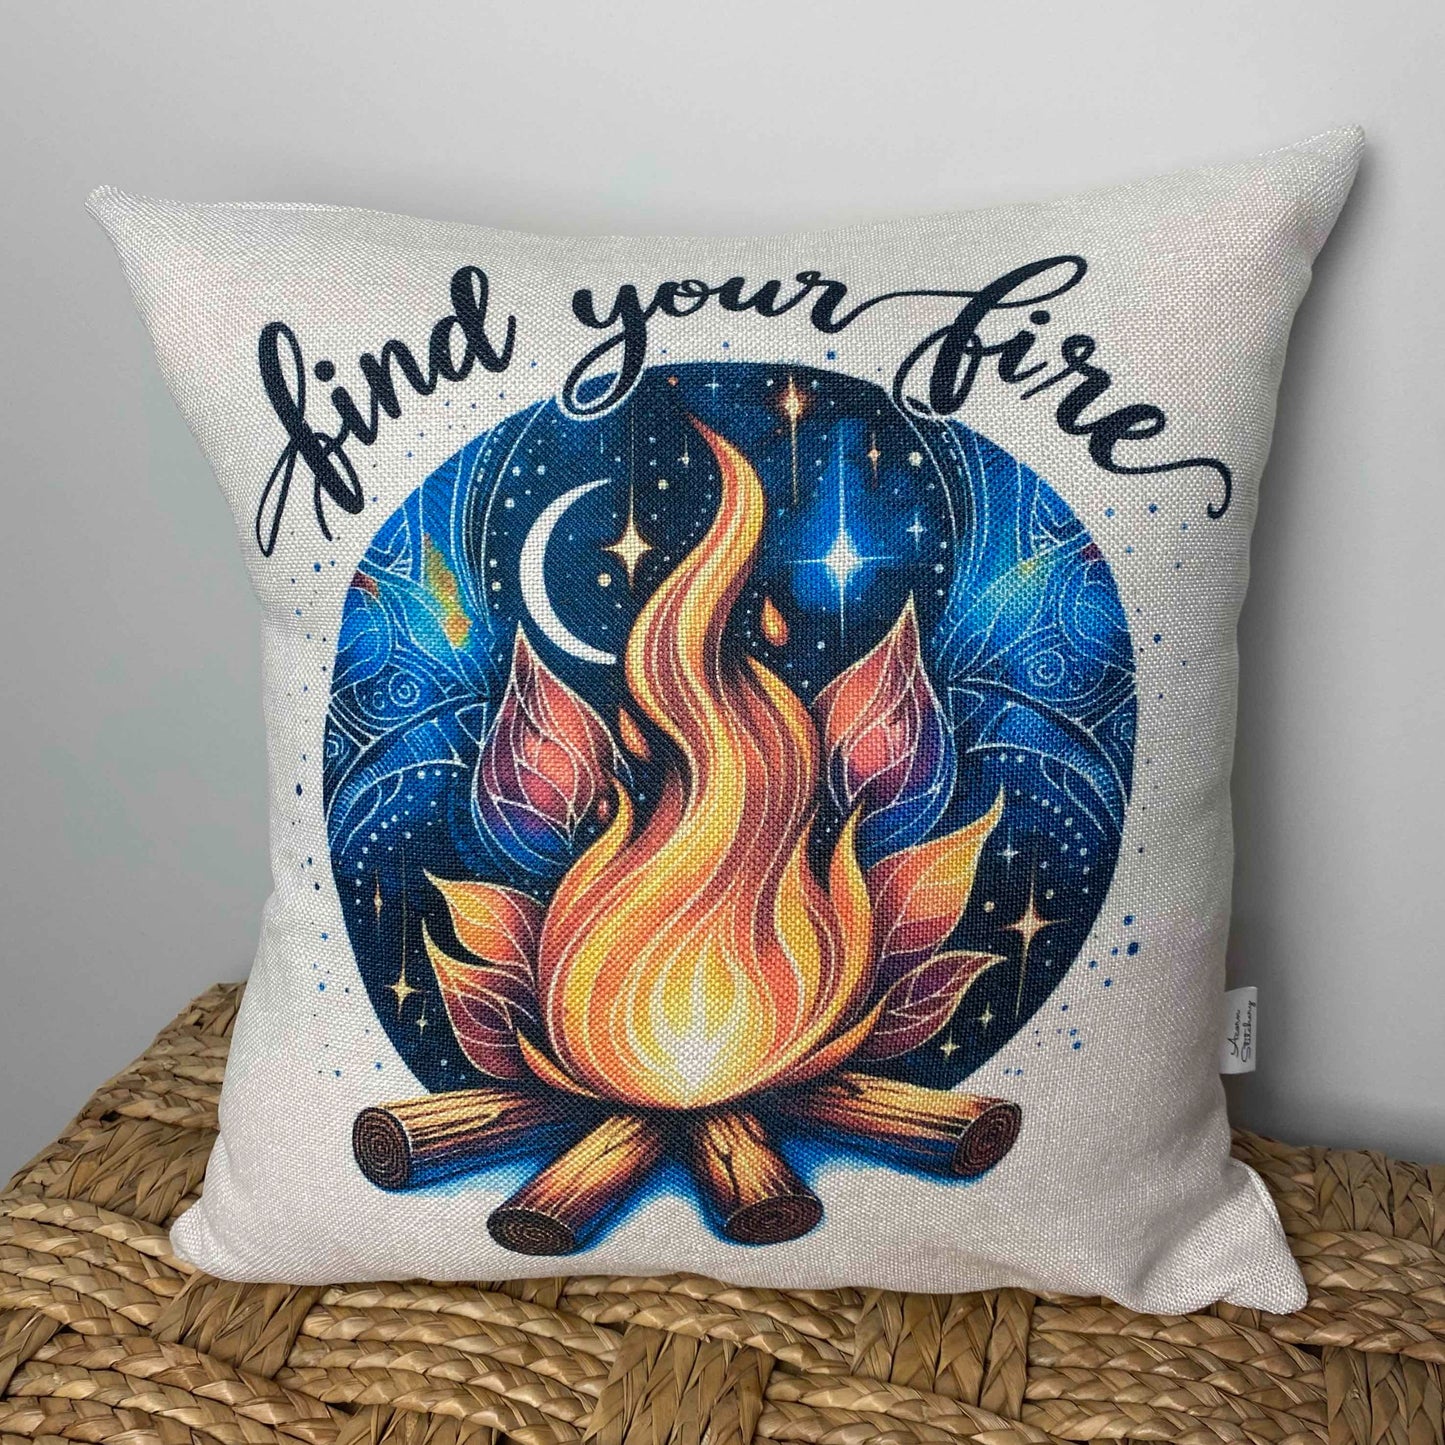 Find Your Fire pillow 18" x 18"